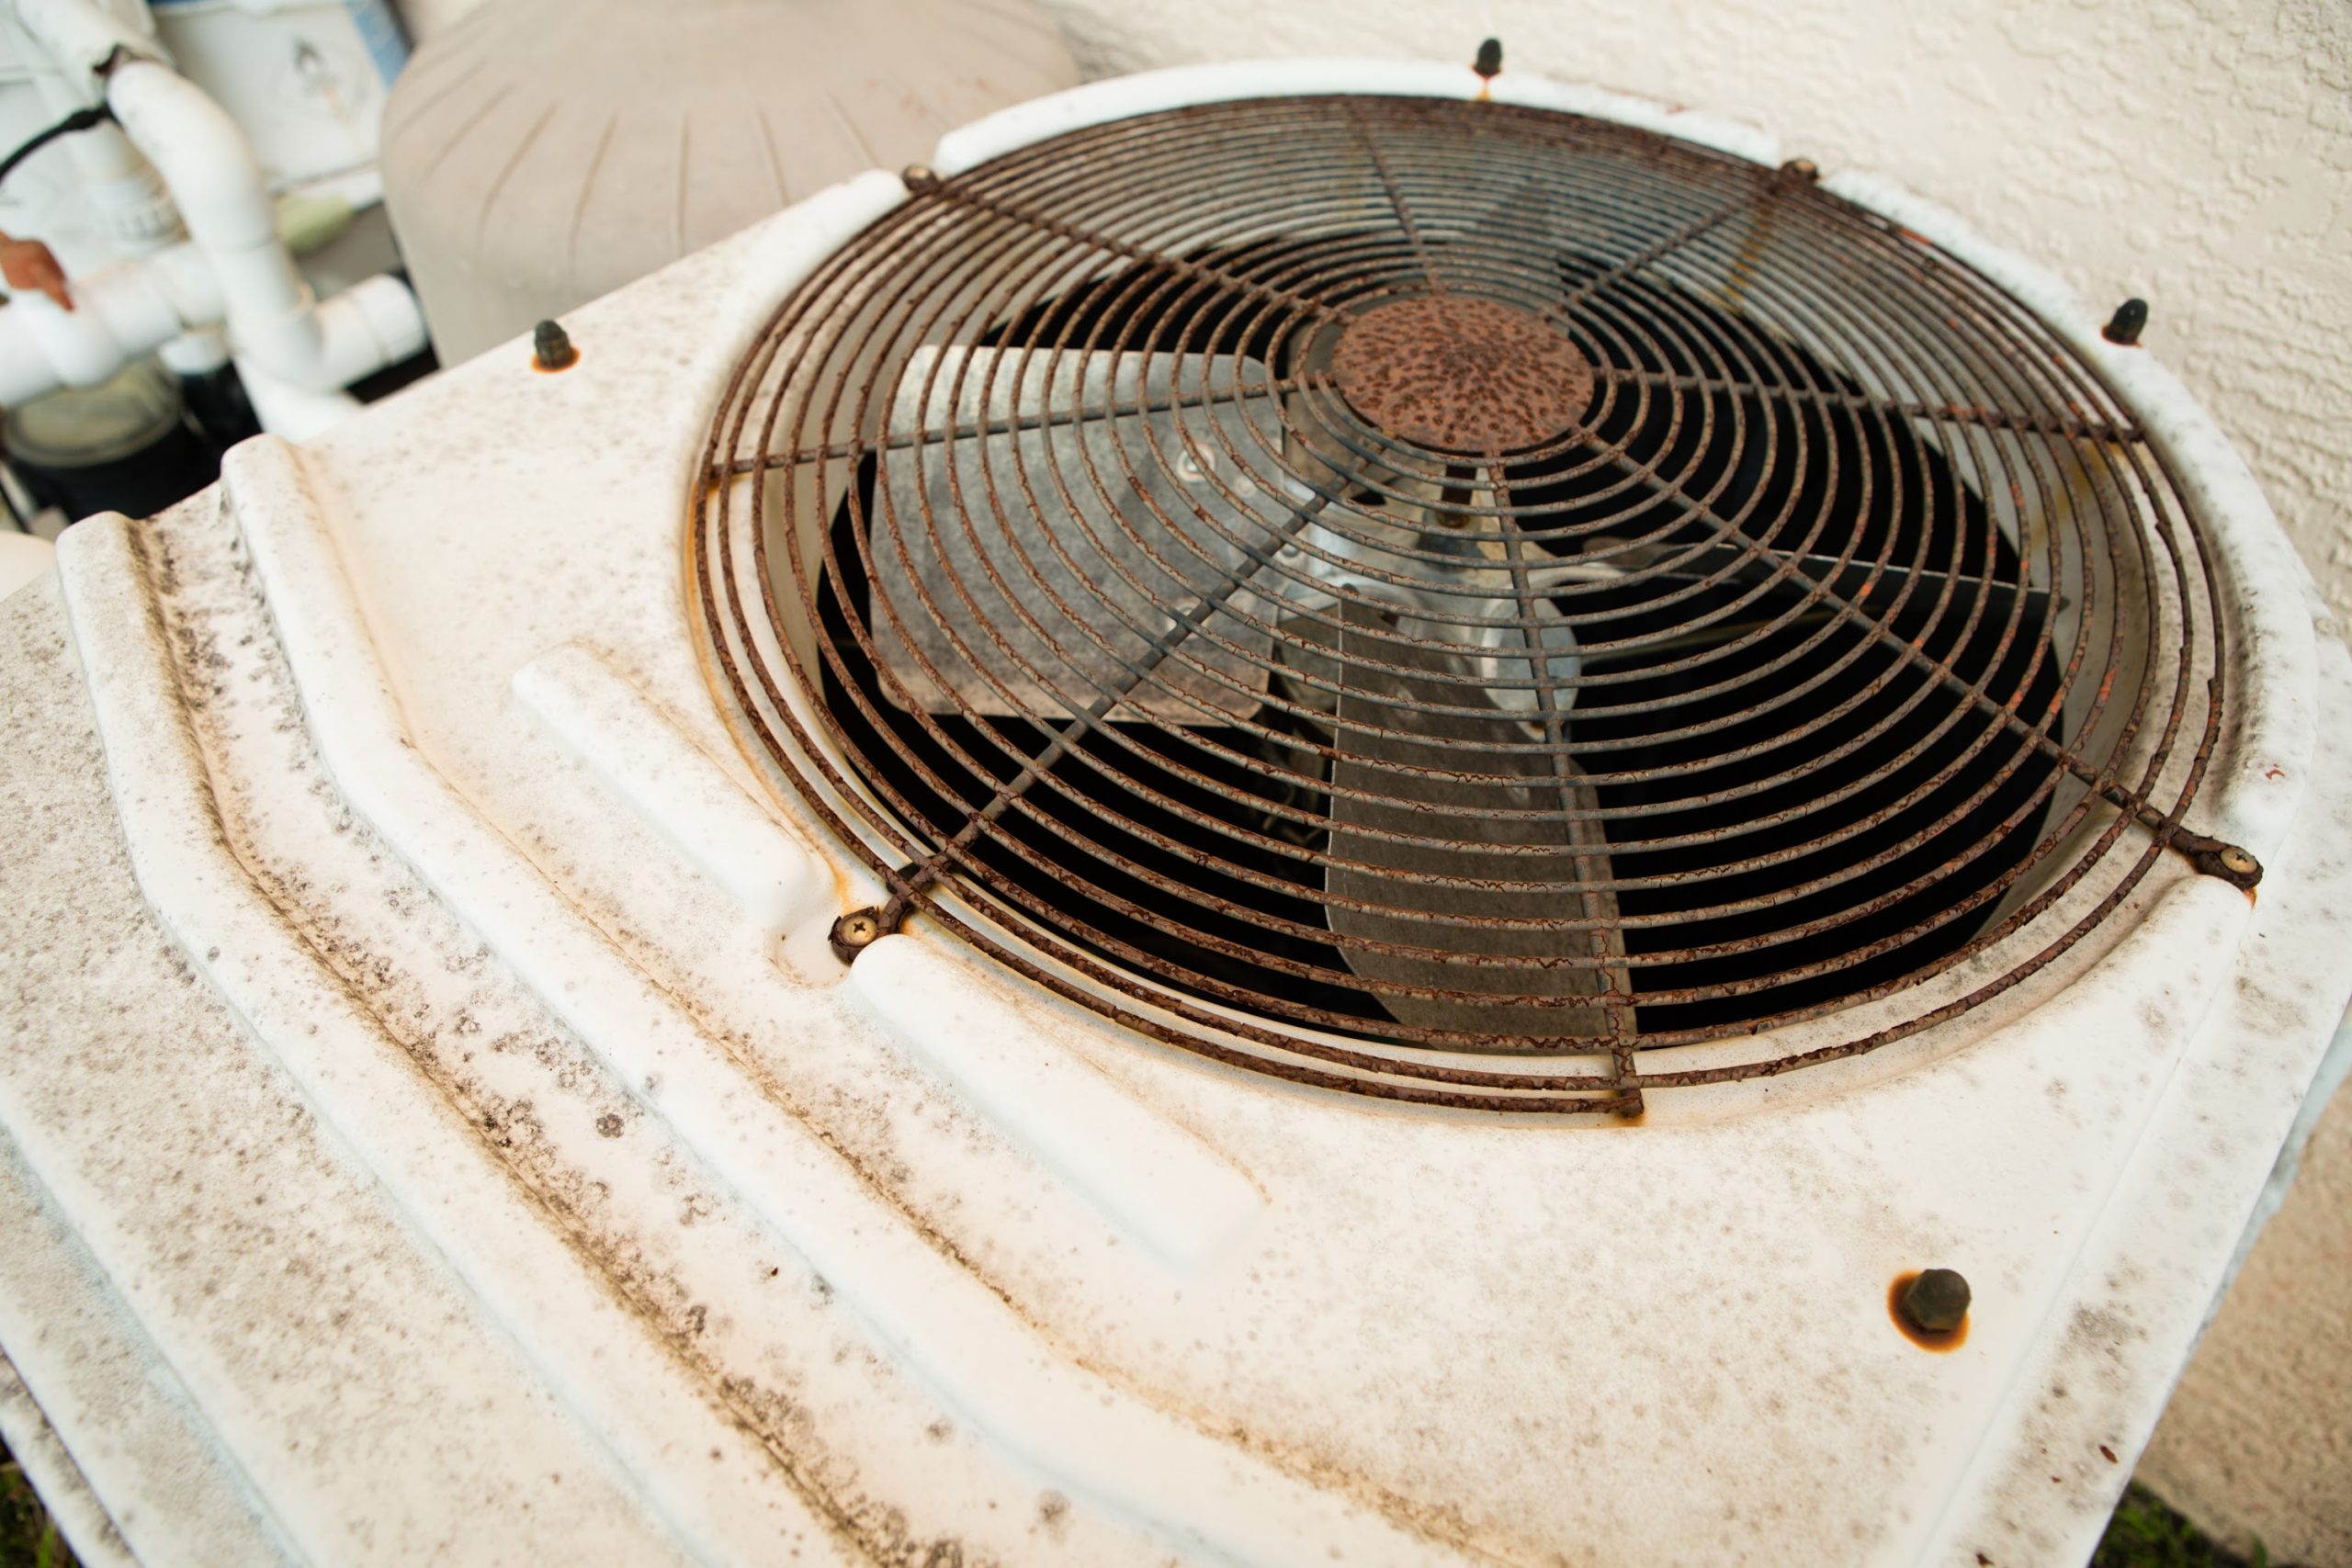 Solutions for Rust-Free Air Conditioners